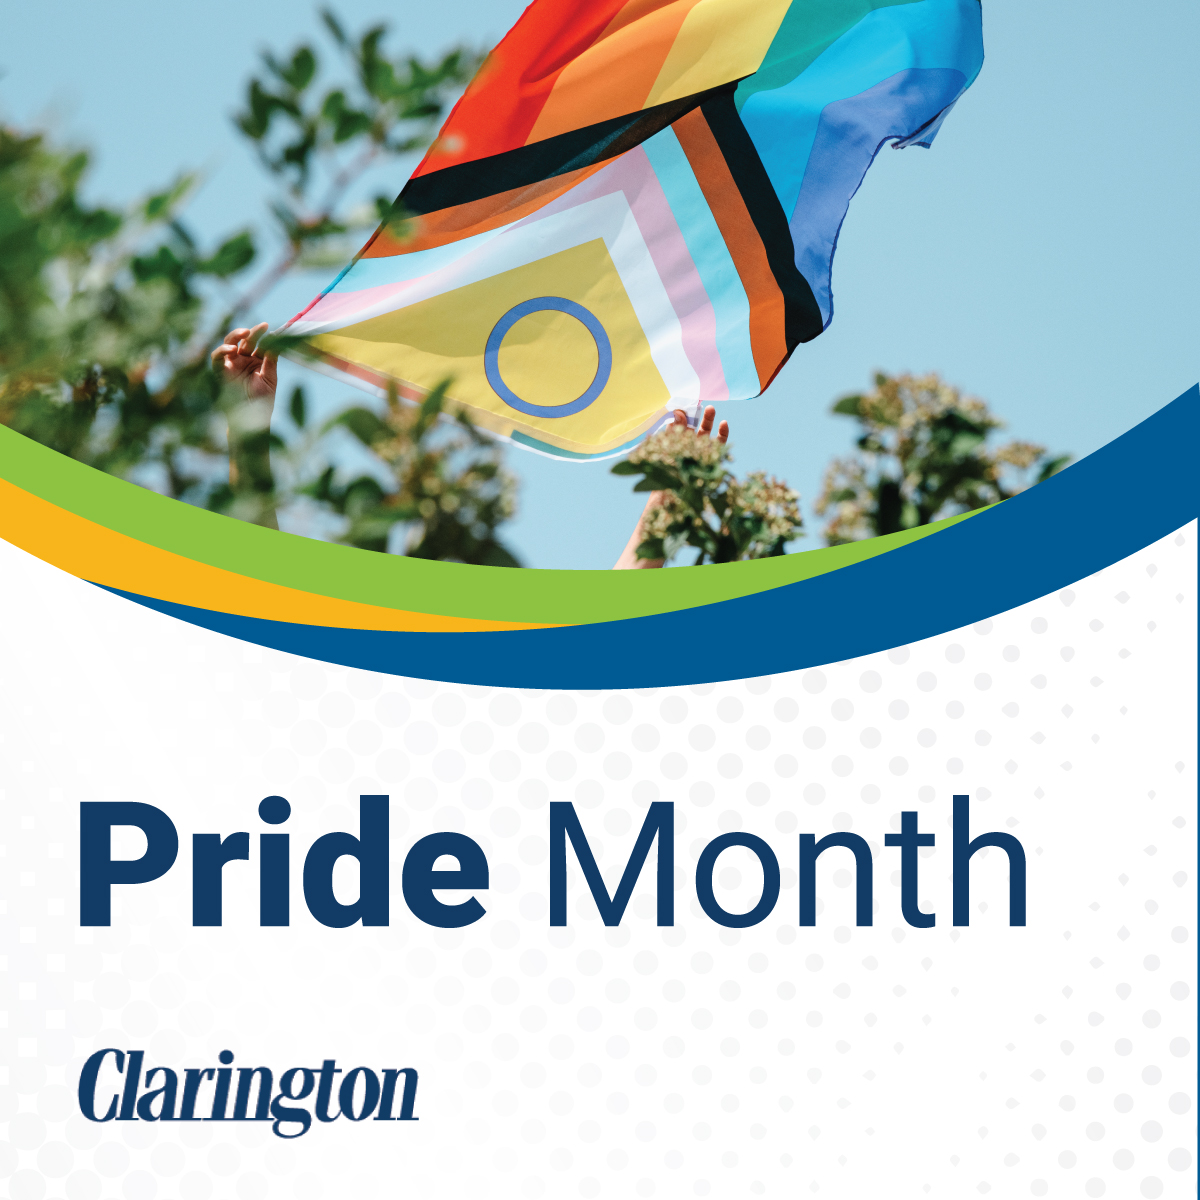 The month of June marks a time for the 2SLGBTQI+ community and allies to unite, recognize and celebrate the resilience and contributions of the 2SLGBTQI+ community. 🌈

Happy Pride Month, Clarington! 🏳️‍🌈